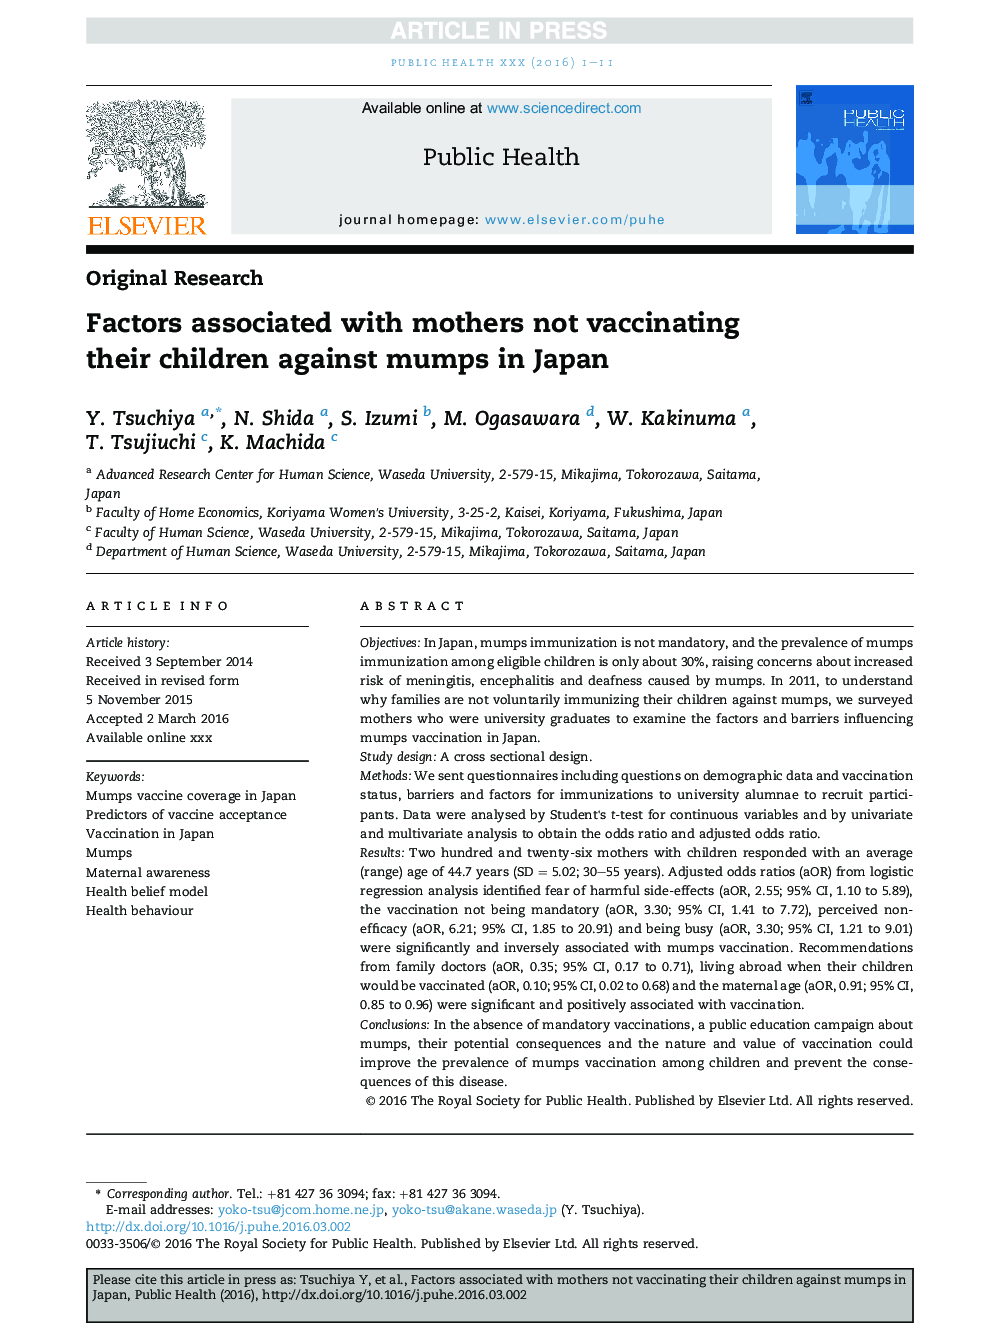 Factors associated with mothers not vaccinating their children against mumps in Japan